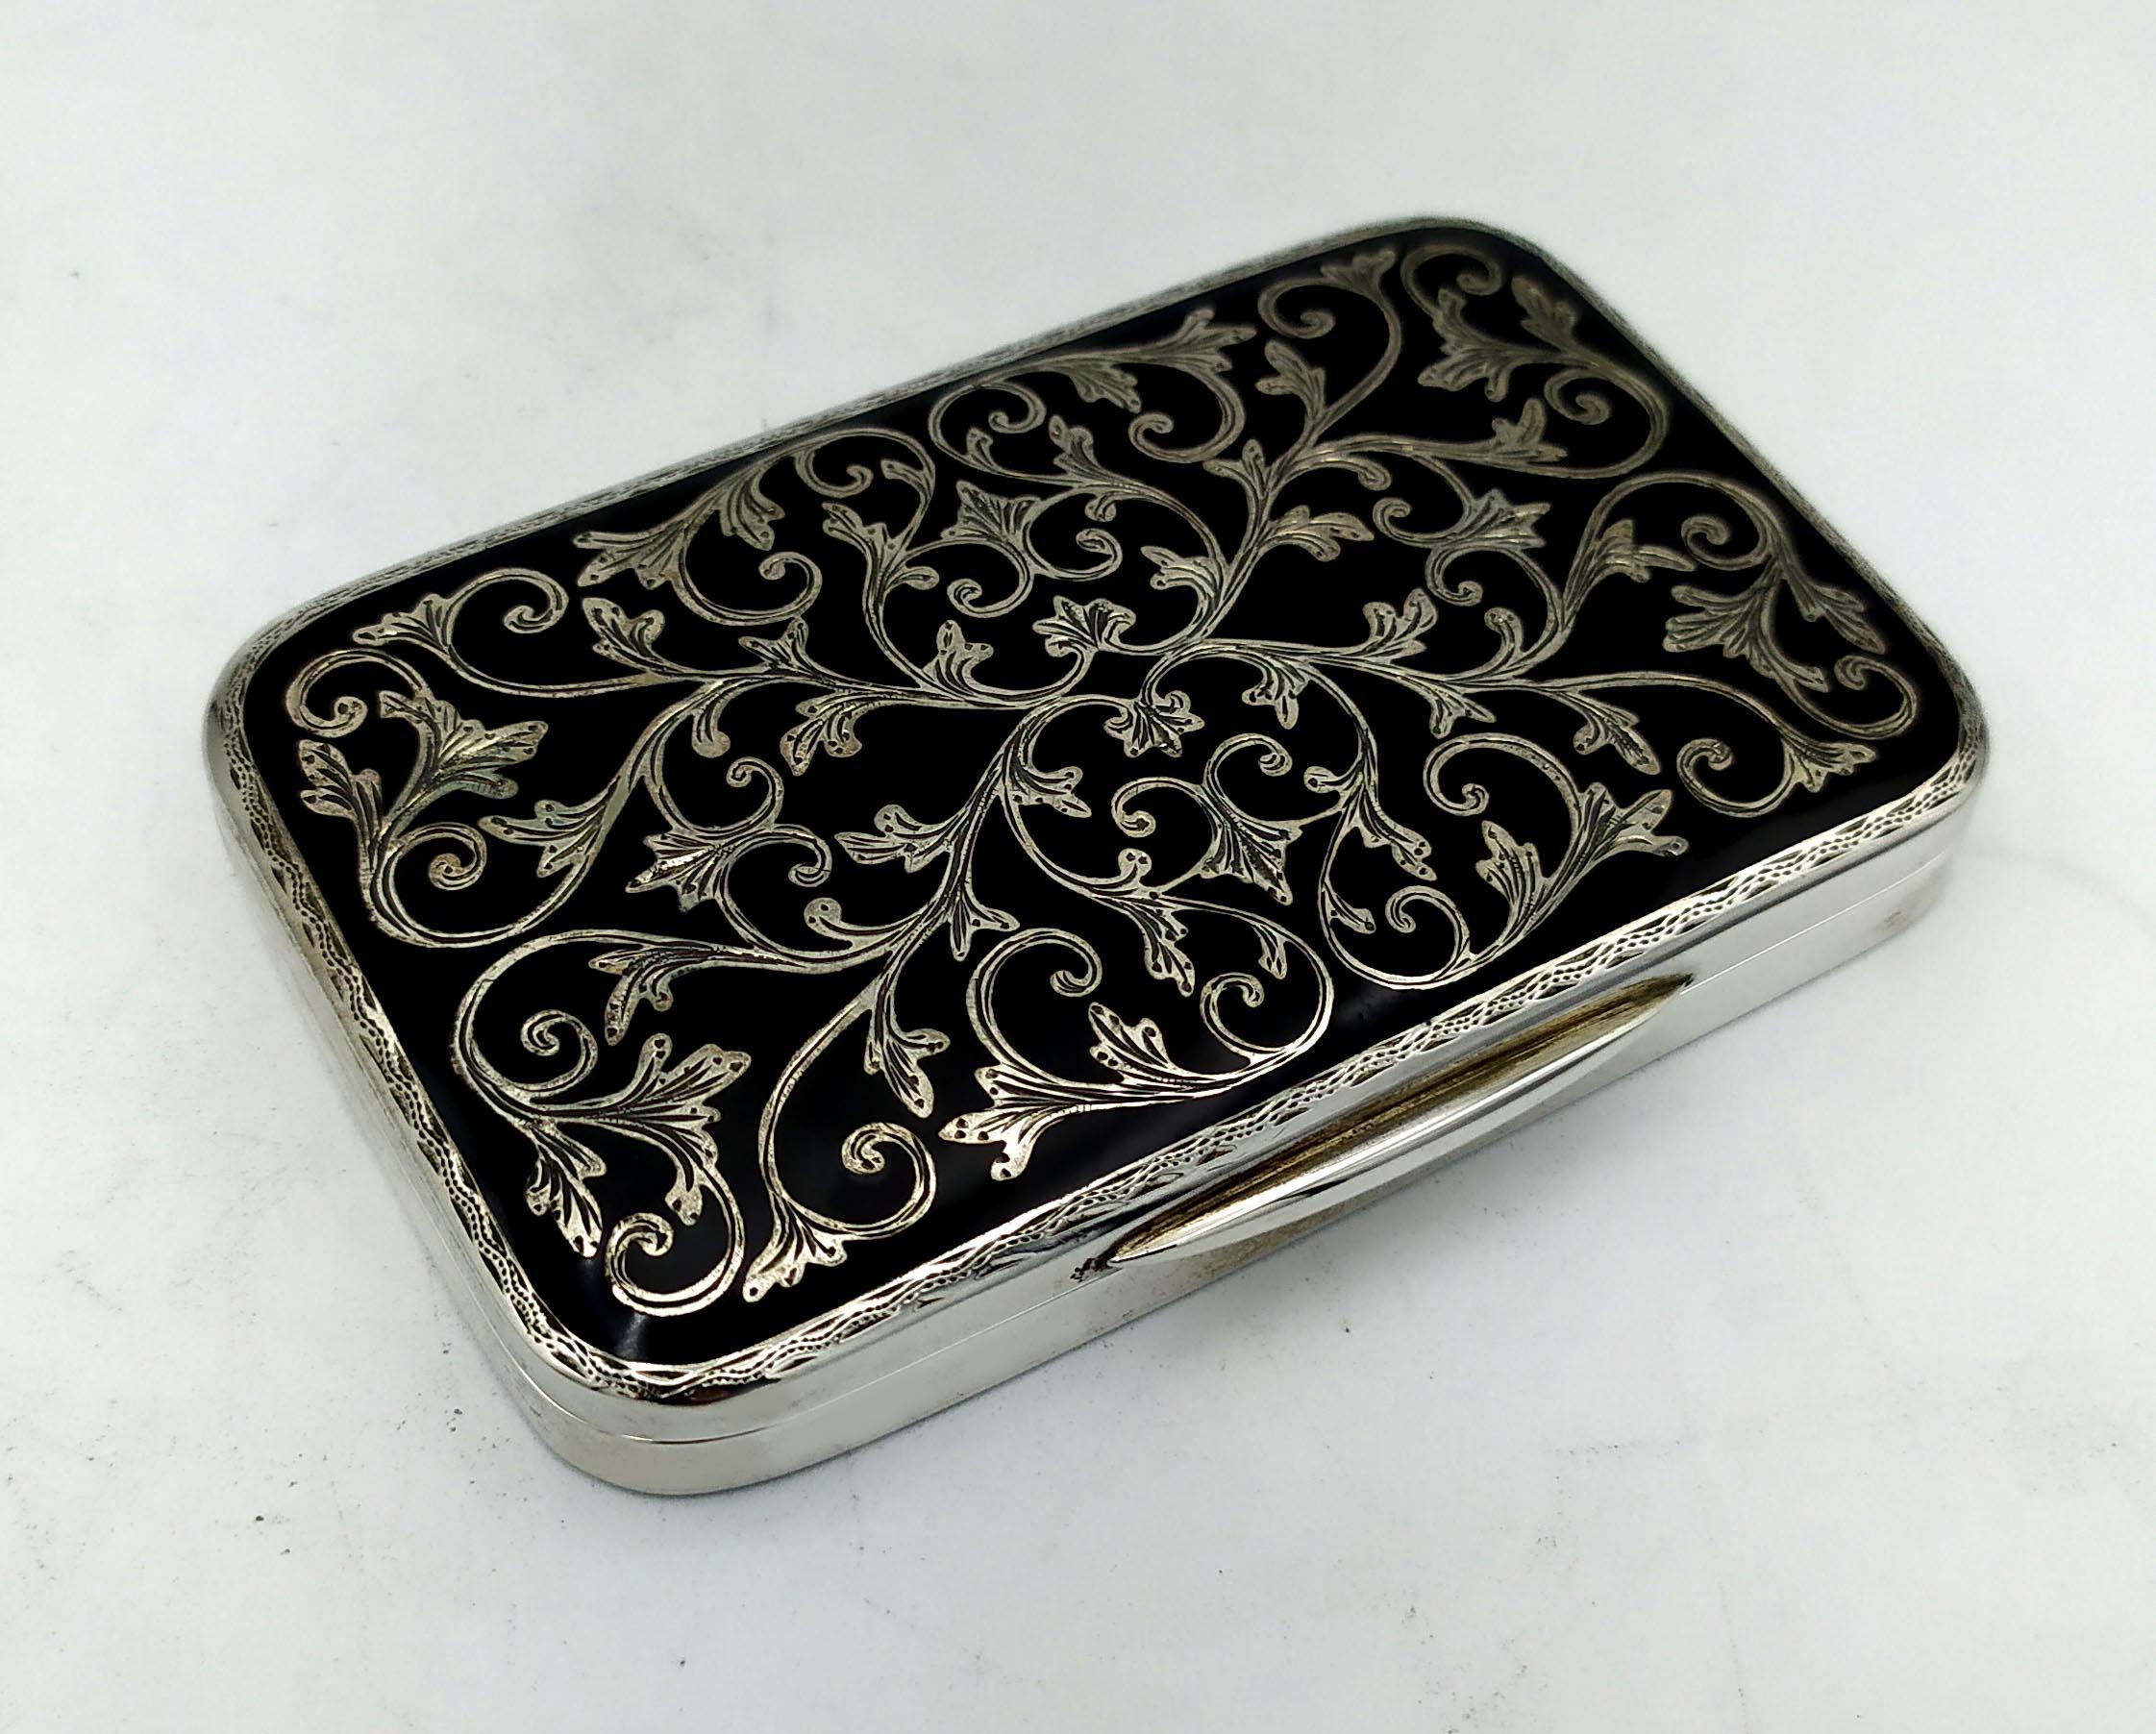 Rectangular cigarette case with rounded corners in 925/1000 sterling silver with Baroque style hand engraving and black fired enamel, Russian niello type. Measurement cm. 5.8 x 9 x 1.2 Weight gr. 171. Made in 1978 in Florence in the headquarters of